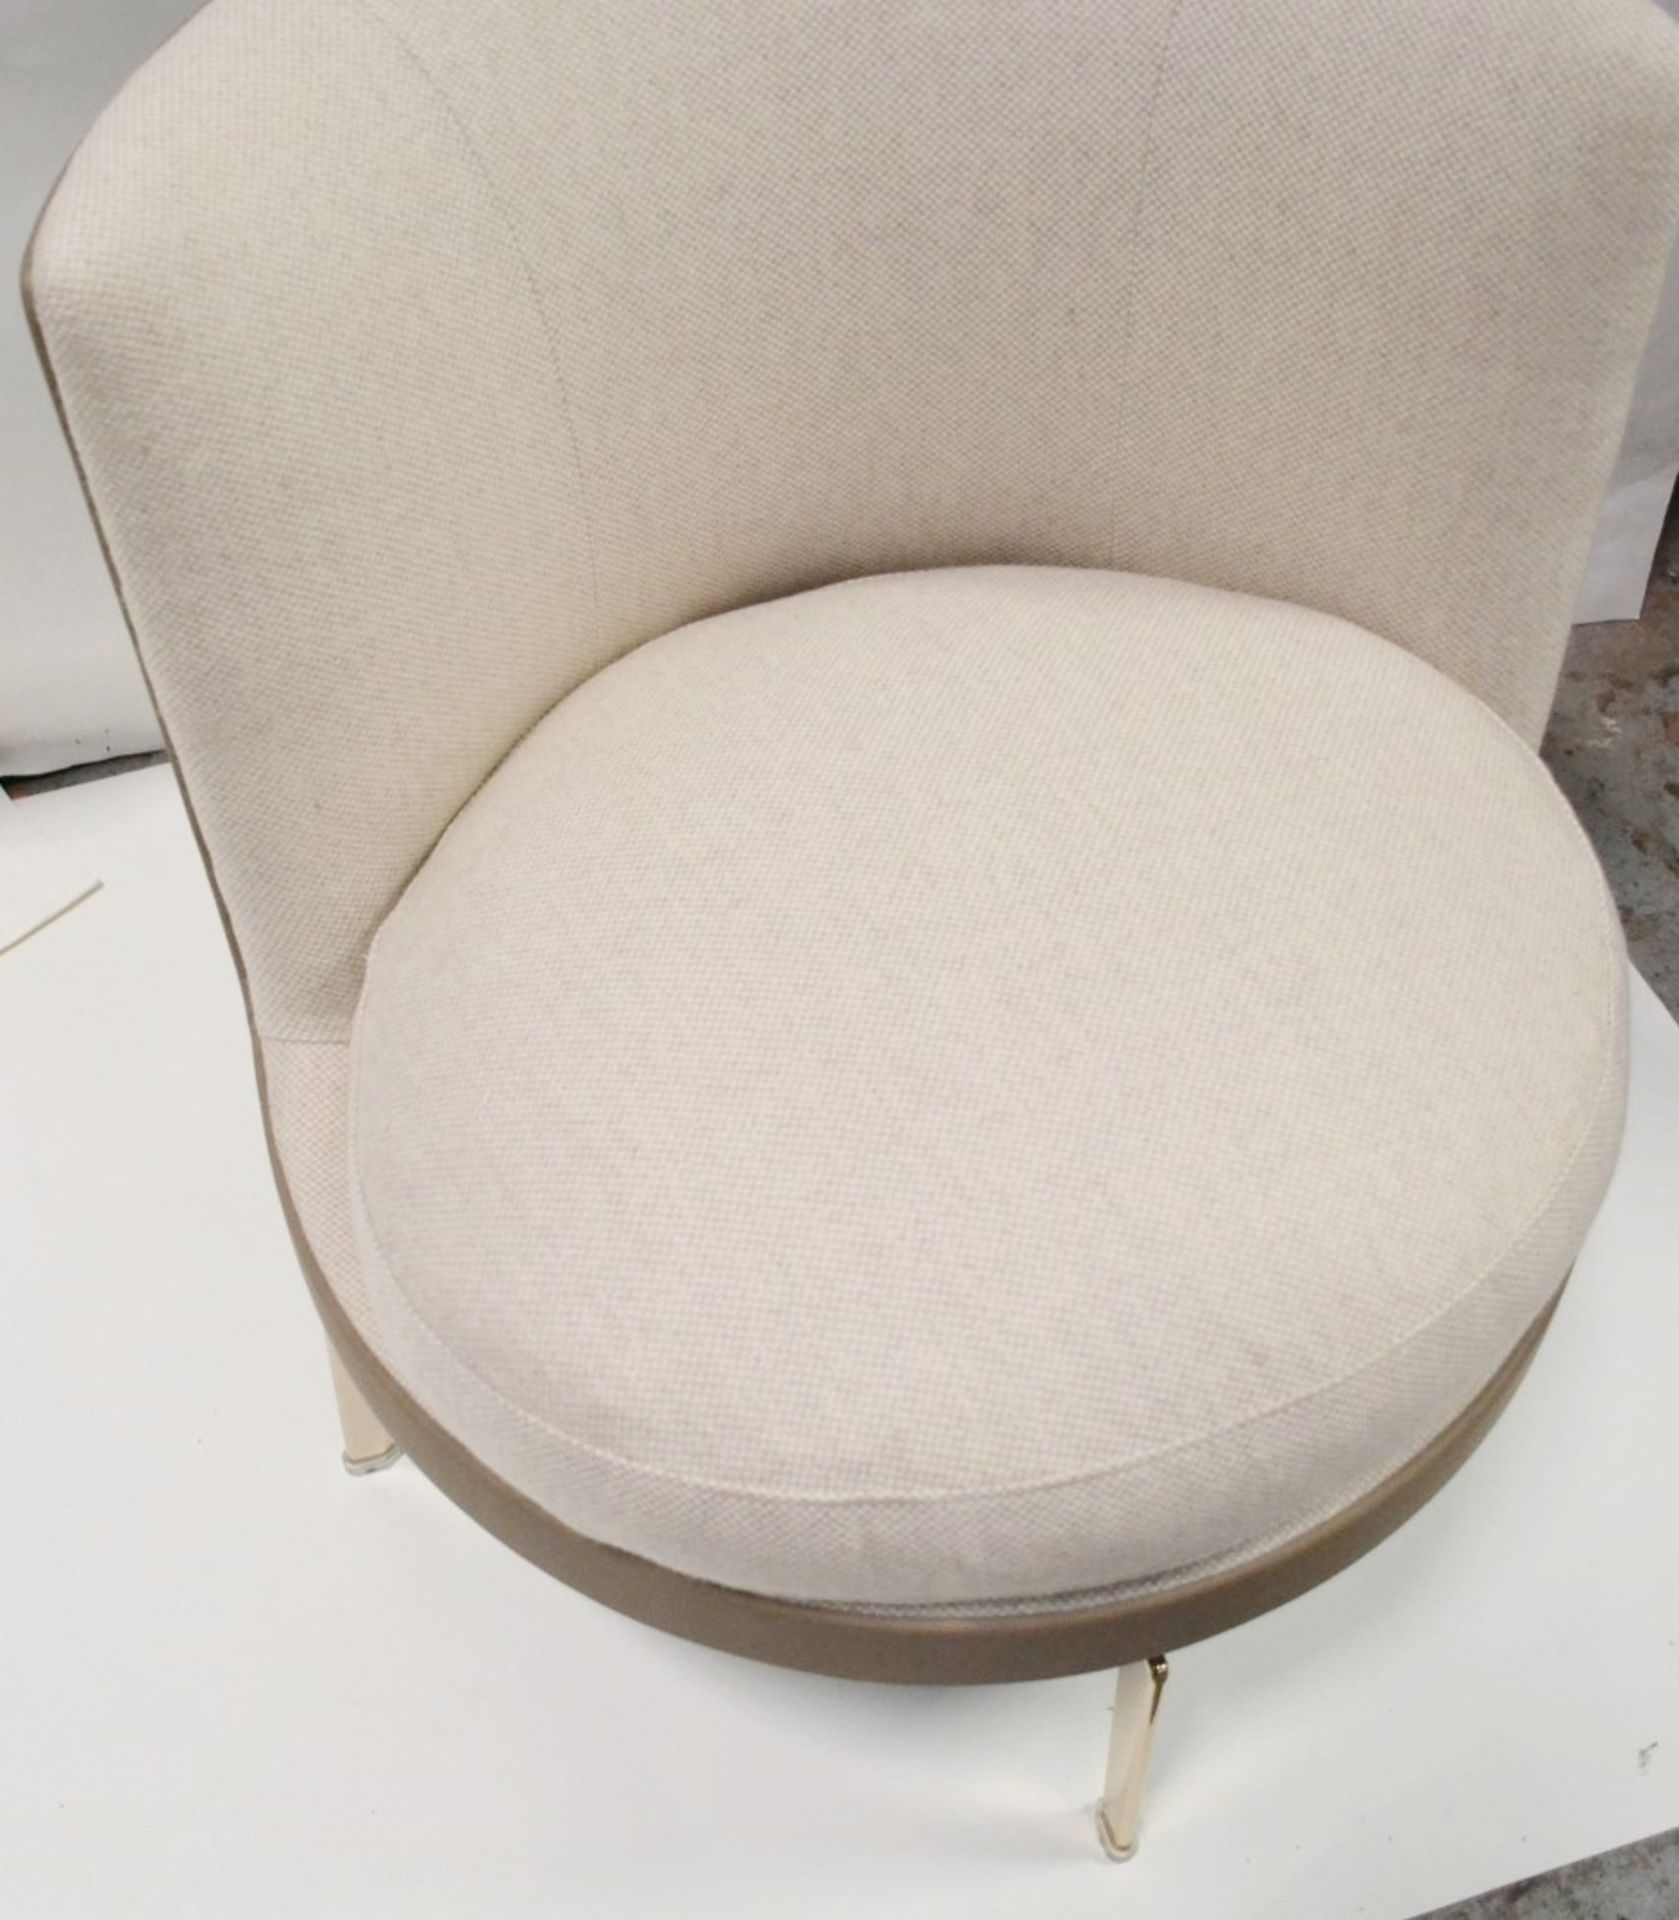 1 x Flexform "FEELGOOD" Soft Armchair - Features Fabric / Leather Upholstery, and Swivel Base - Ref: - Image 3 of 10